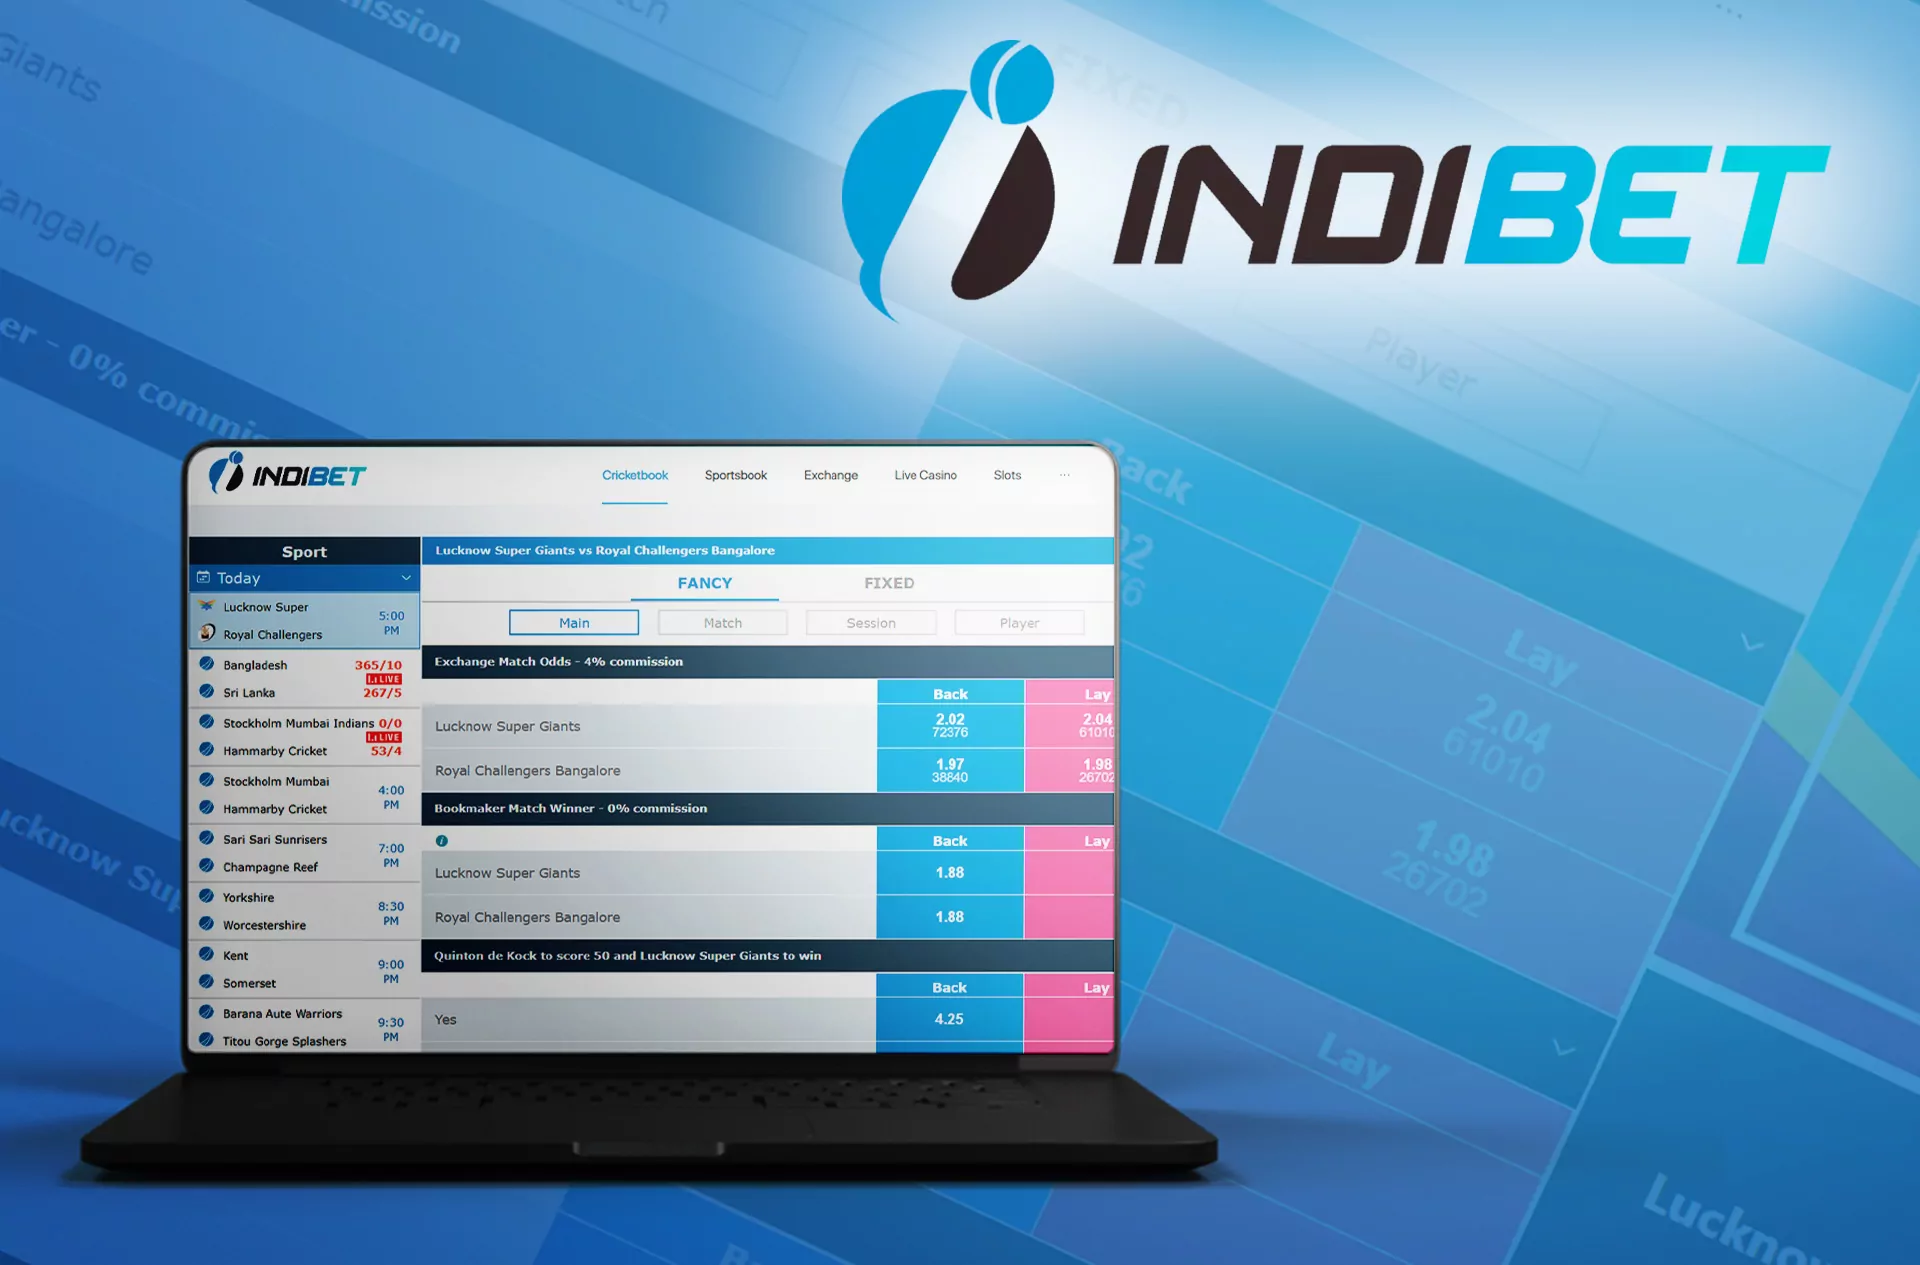 Indibet provides its players with tons of different bonuses for cricket.